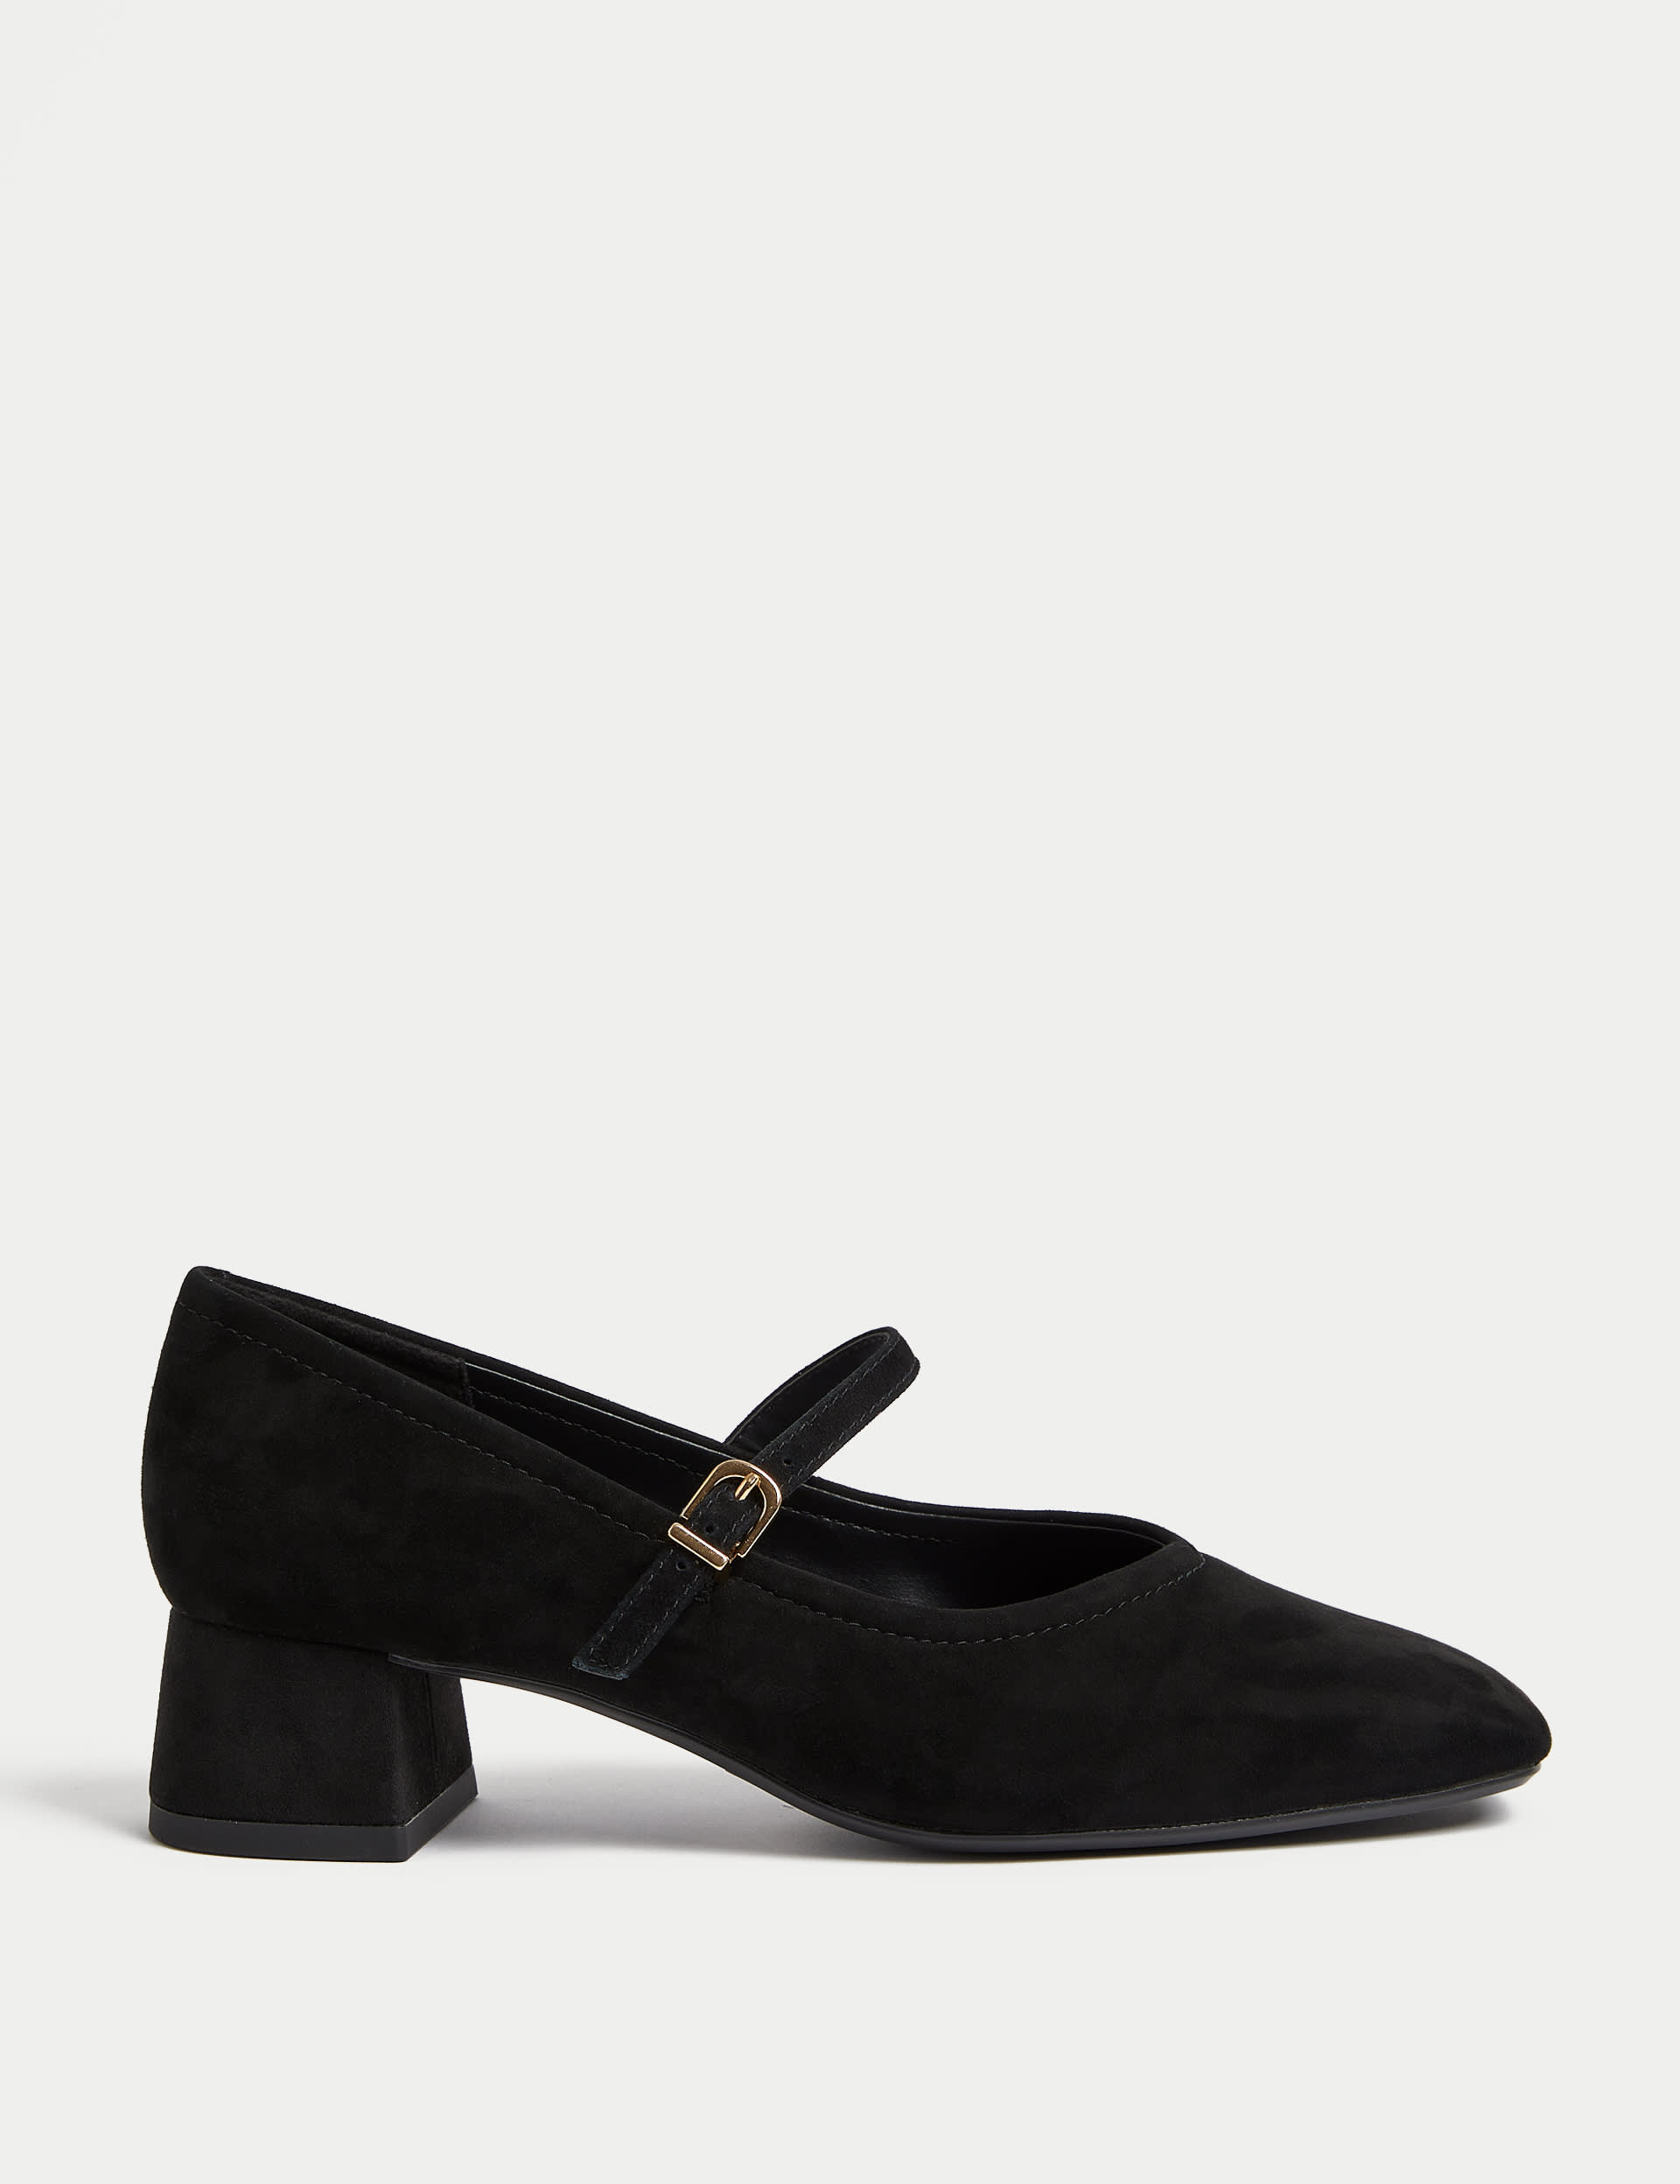 Suede Strappy Block Heel Court Shoes